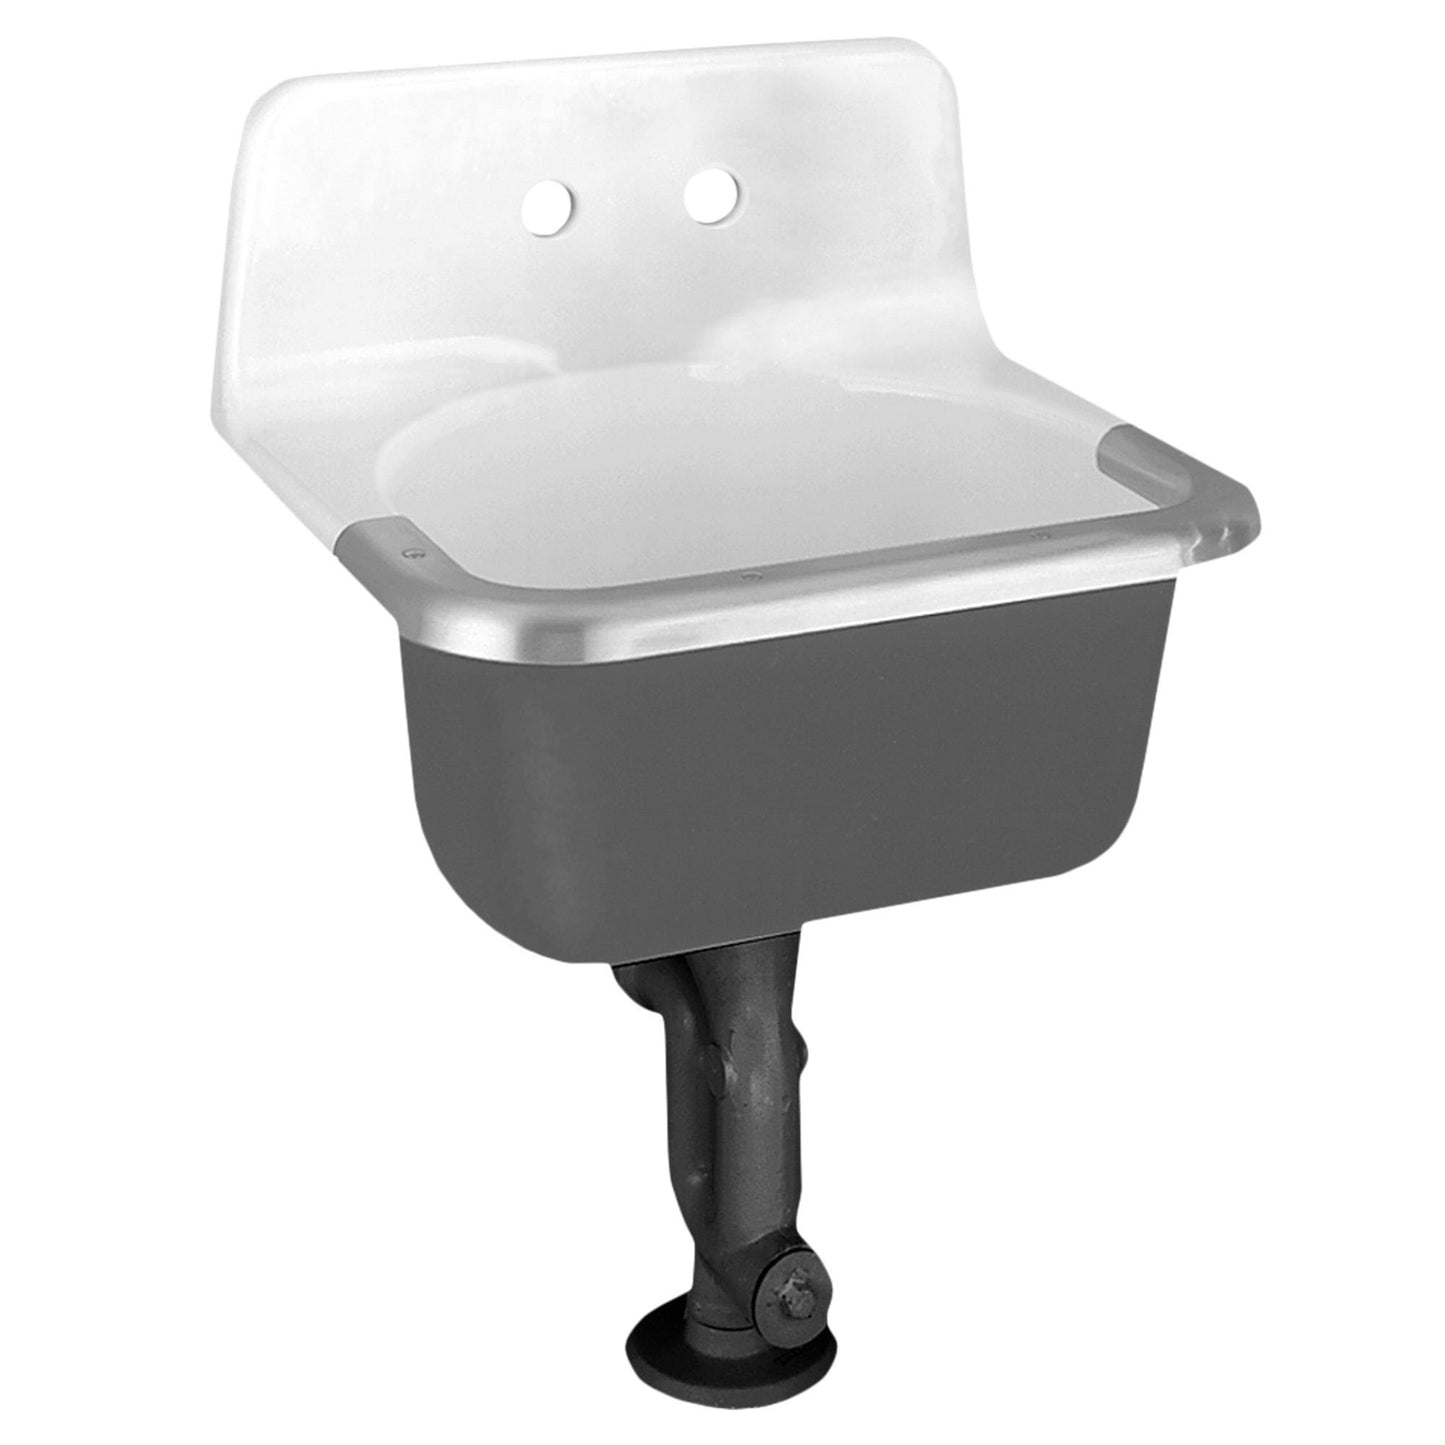 AMERICAN-STANDARD 7695008.020, Akron Wall-Hung Cast Iron Service Sink With 8-inch Faucet Holes and Rim Guard in White